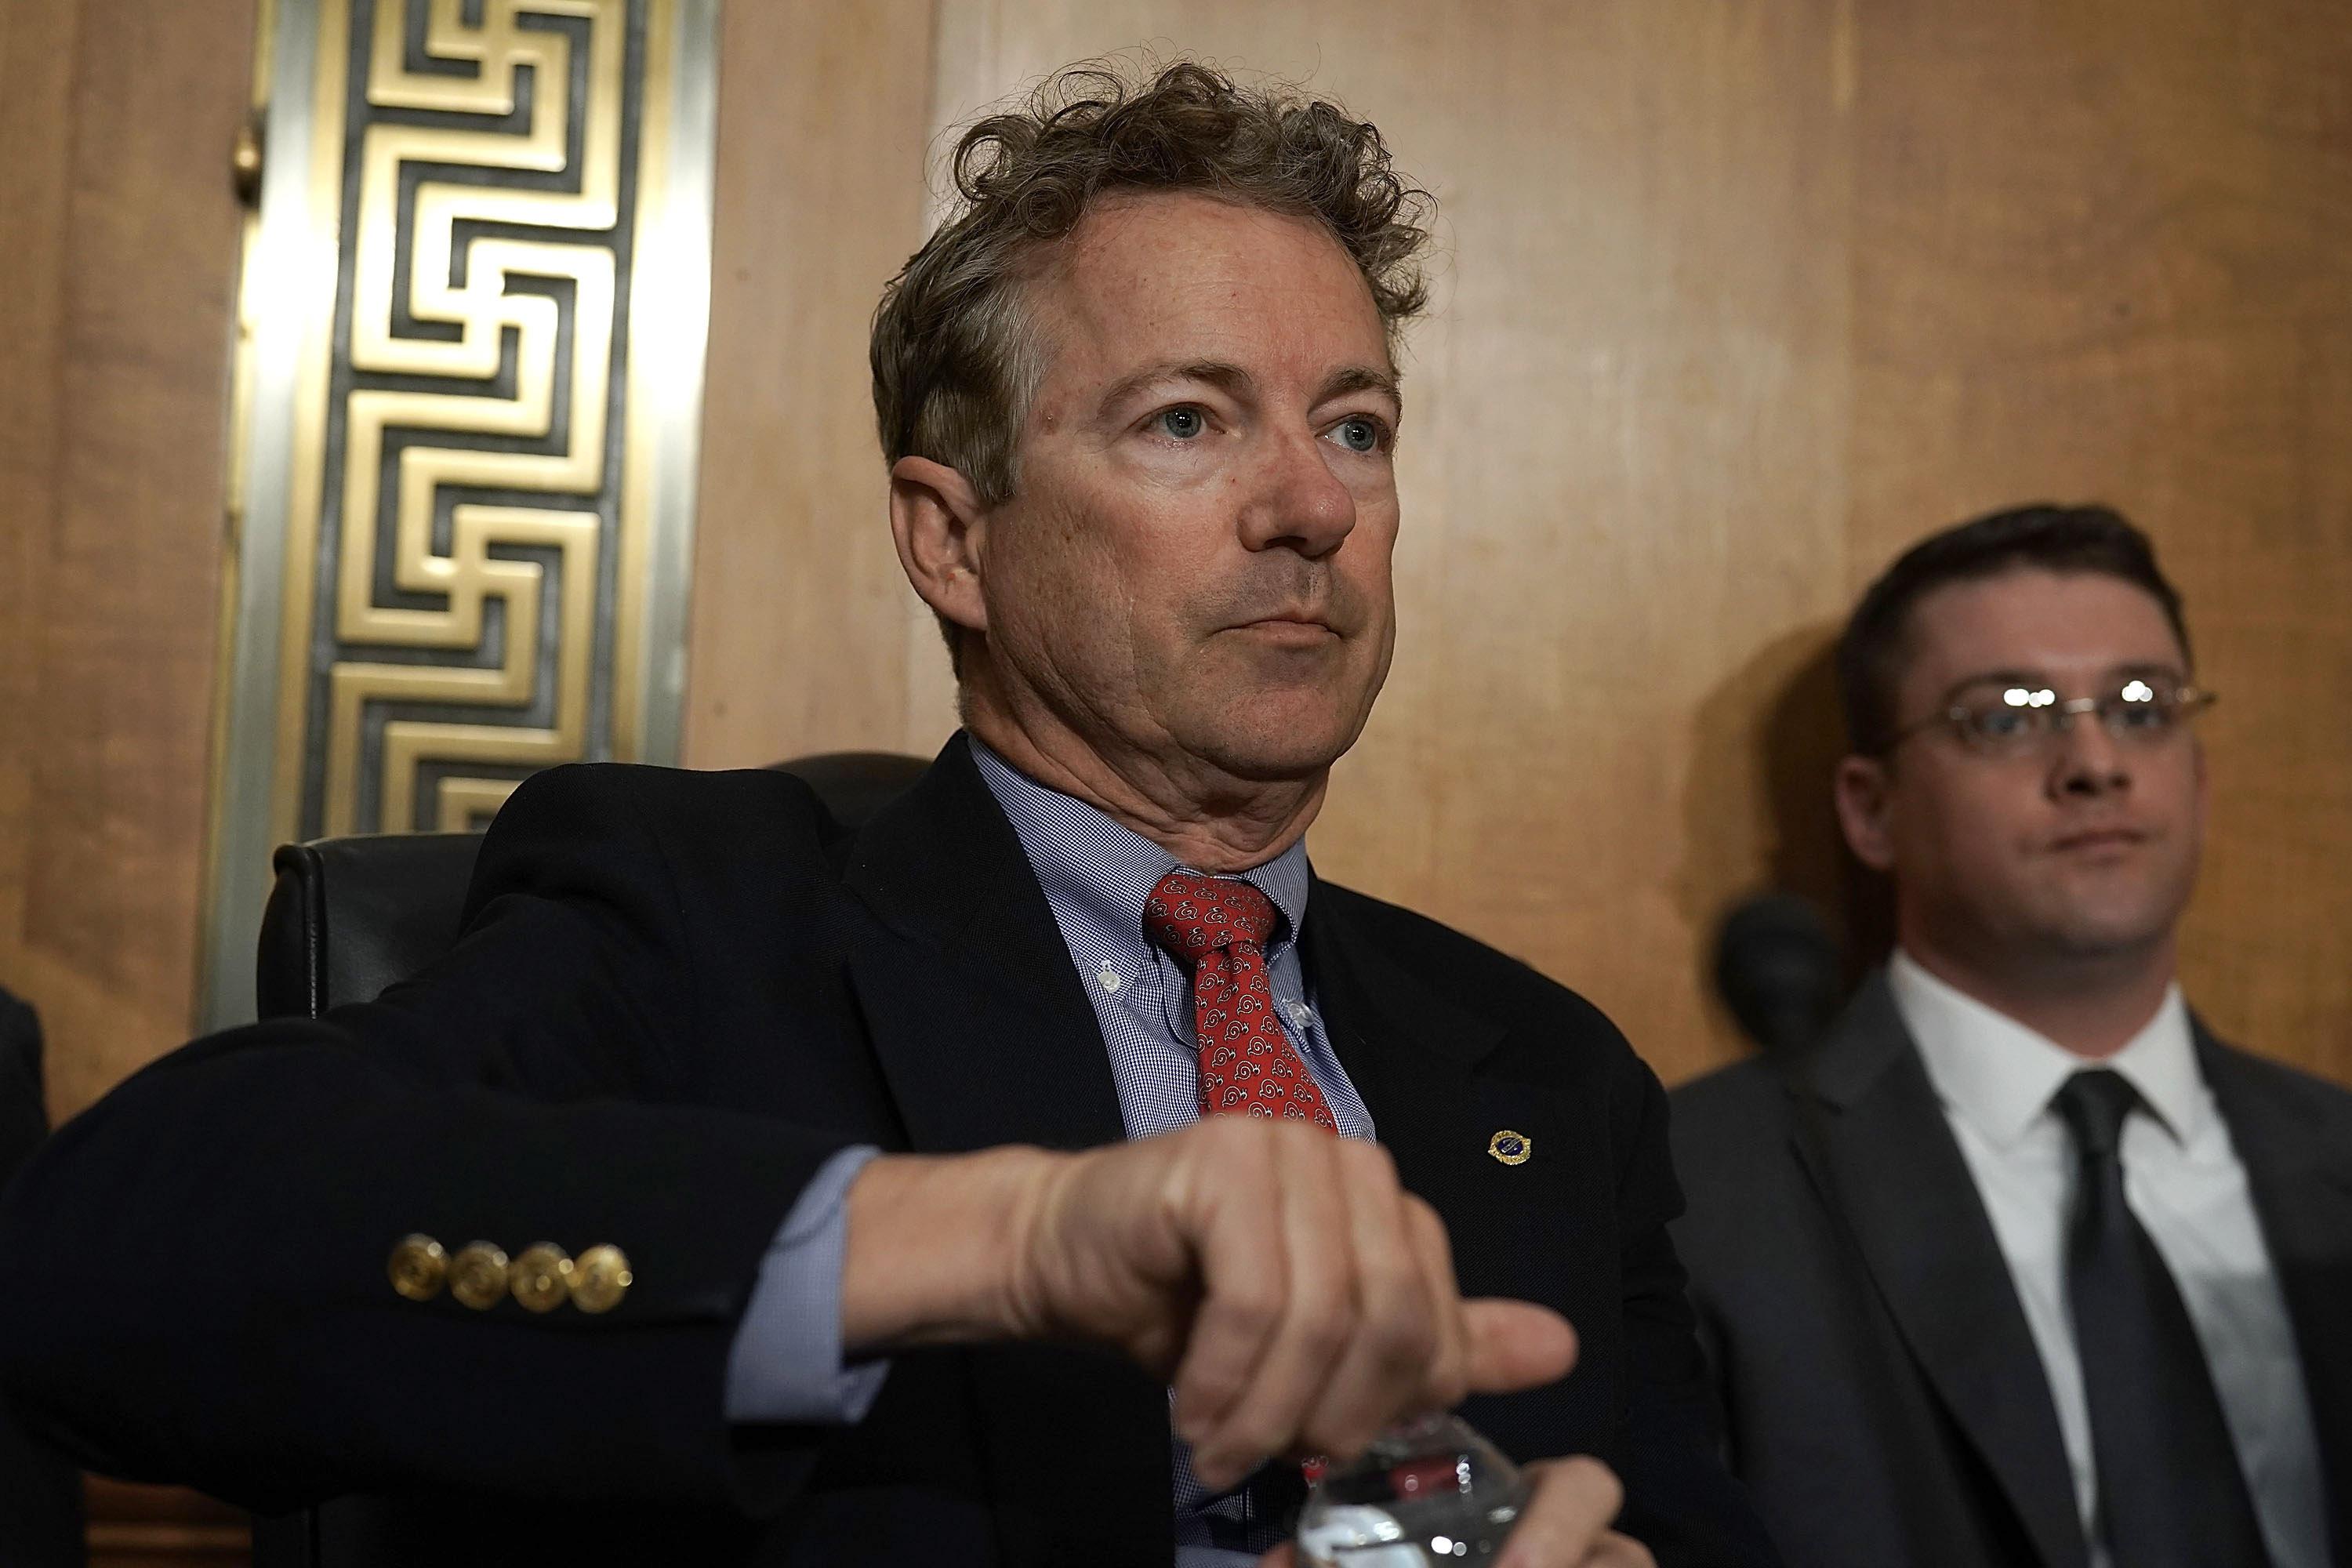 WASHINGTON, DC - APRIL 23:  U.S. Sen. Rand Paul (R-KY) waits for the beginning of a Senate Foreign Relations Committee meeting April 23, 2018 on Capitol Hill in Washington, DC. The committee is scheduled to vote on the nomination of CIA Director Mike Pompeo to be the next Secretary of State. After some hesitation, Sen. Paul has said he will support Pompeo for the position. (Photo by Alex Wong/Getty Images)